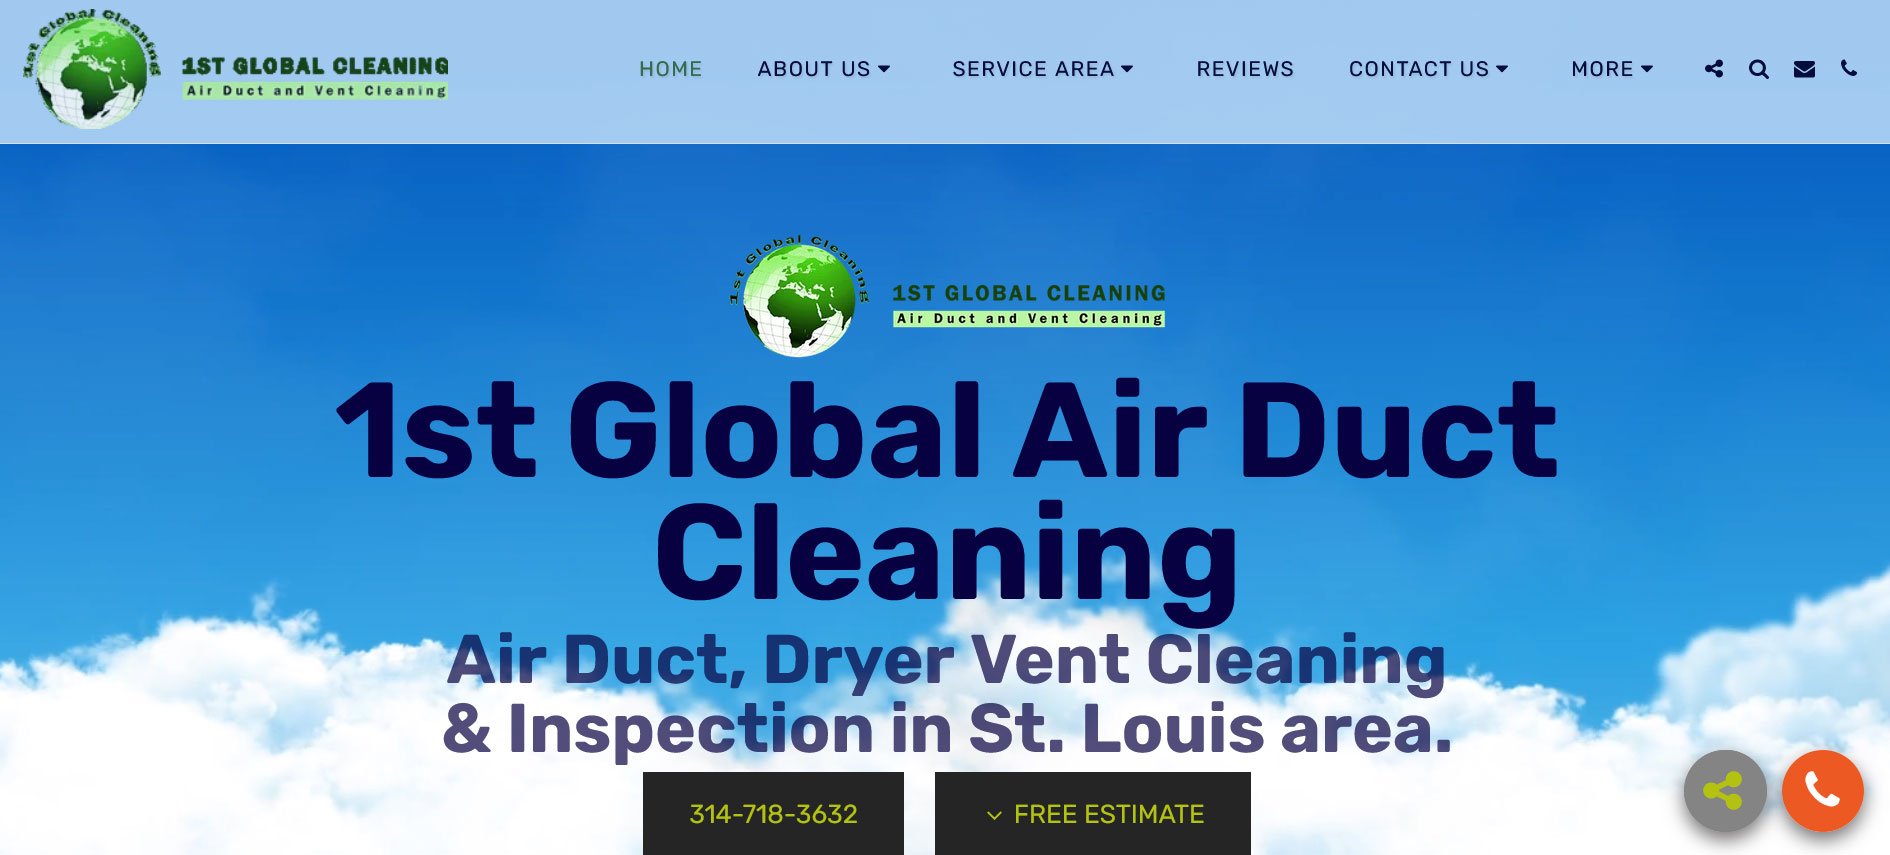 1st global air duct cleaning